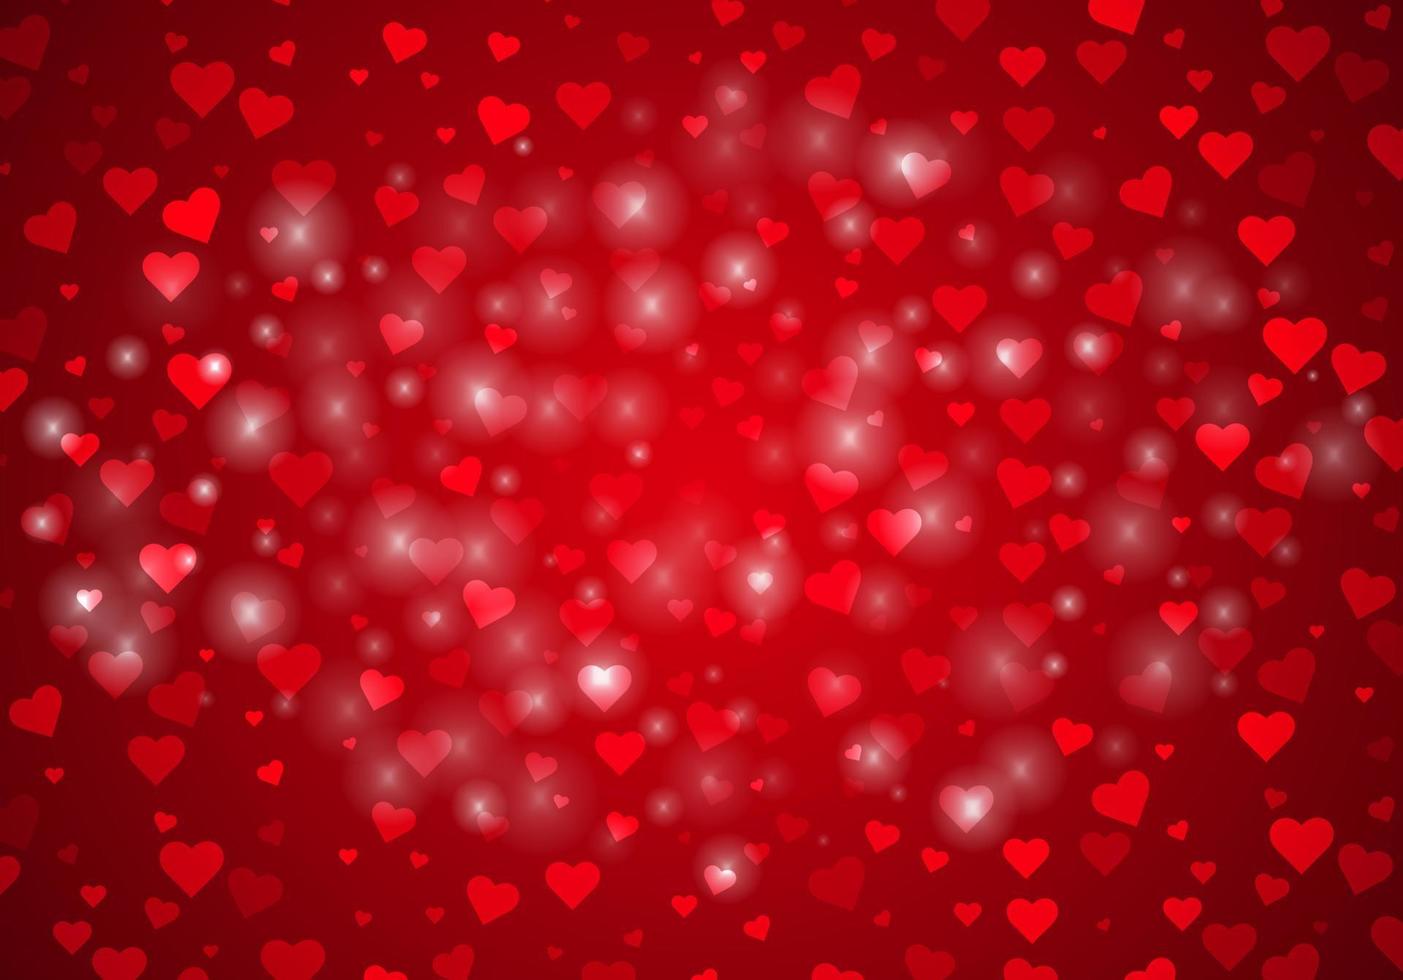 Bright red vector background for Valentine's Day or wedding with hearts and highlights.Abstract holiday backdrop.Greeting Card. Vector illustration